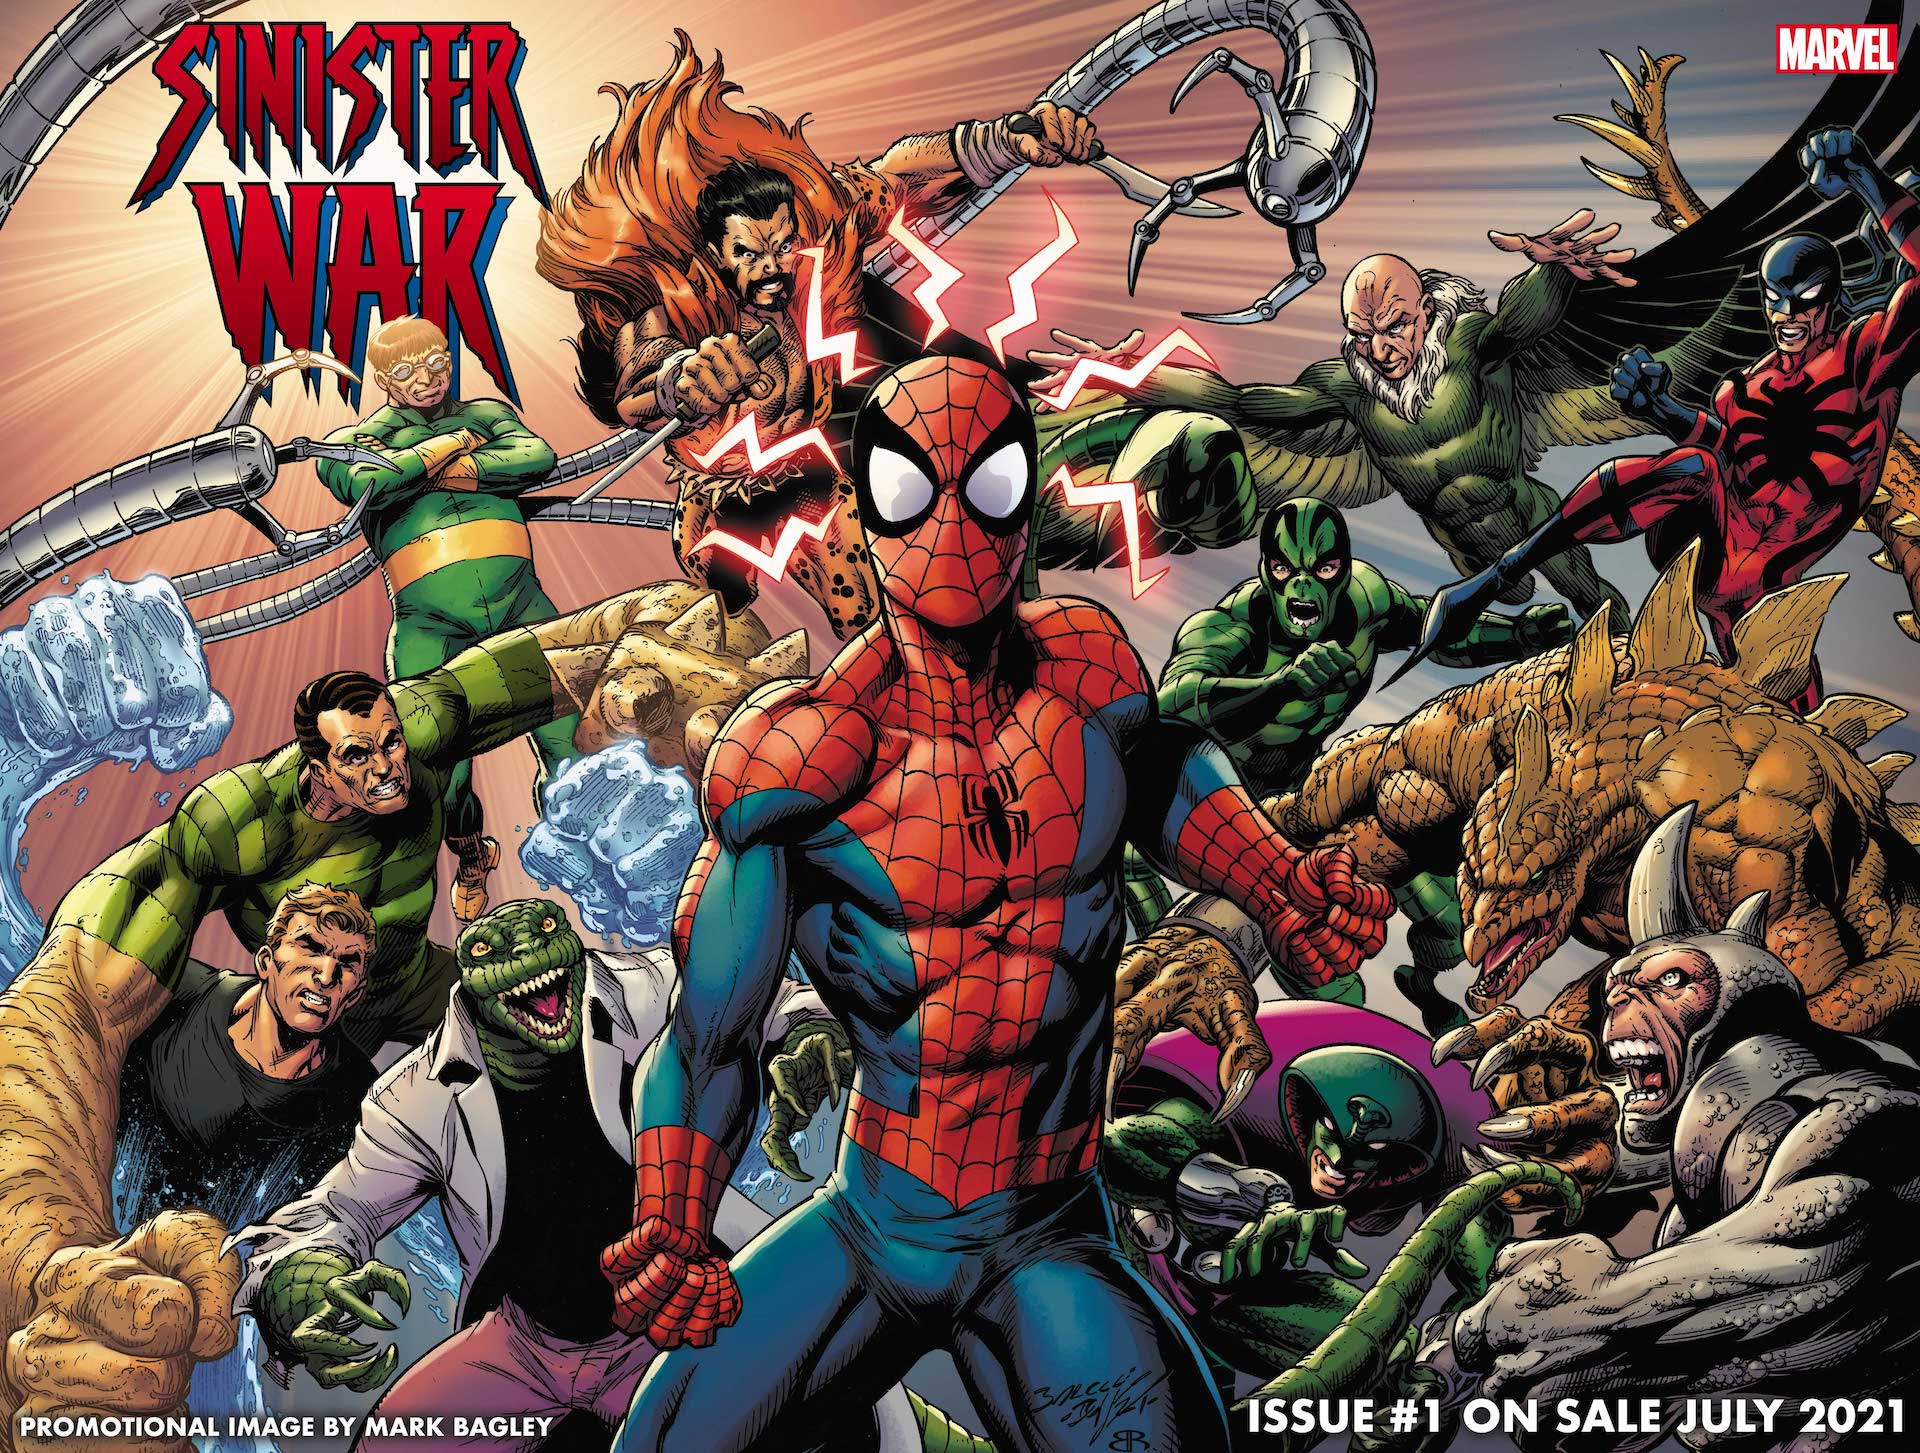 Marvel announces 'Sinister War' story in Nick Spencer's 'Amazing Spider-Man'